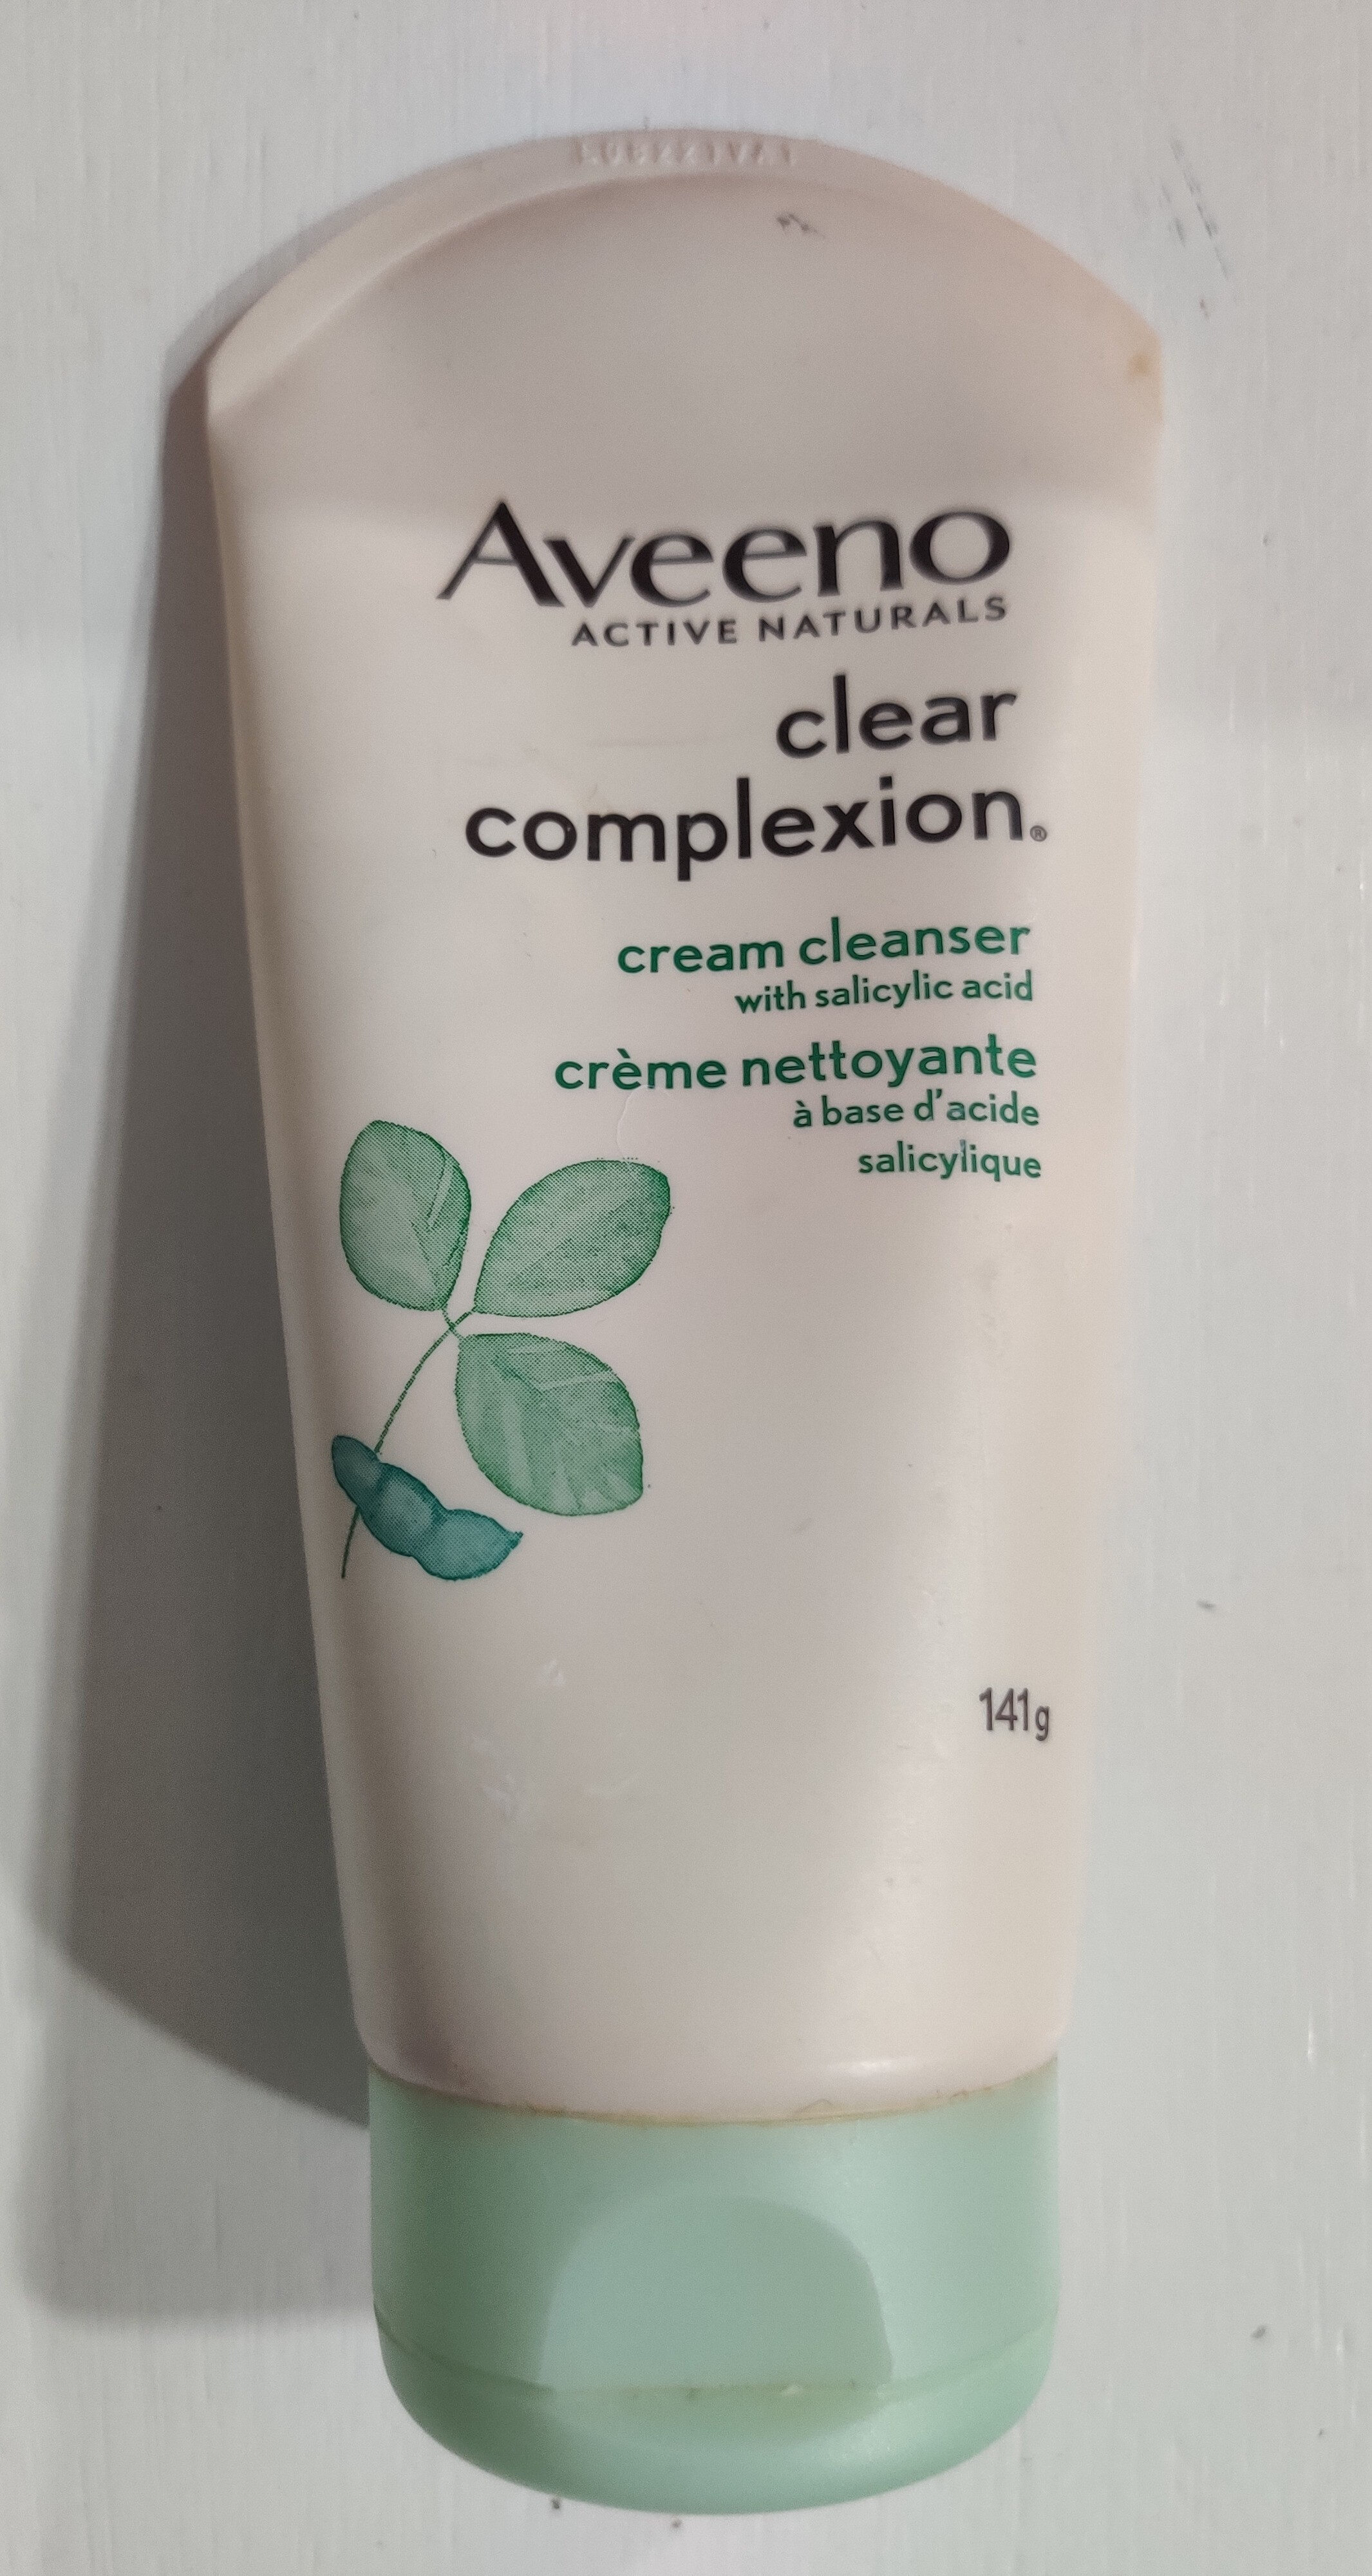 Aveeno clear completion cream cleanser - Produkt - en